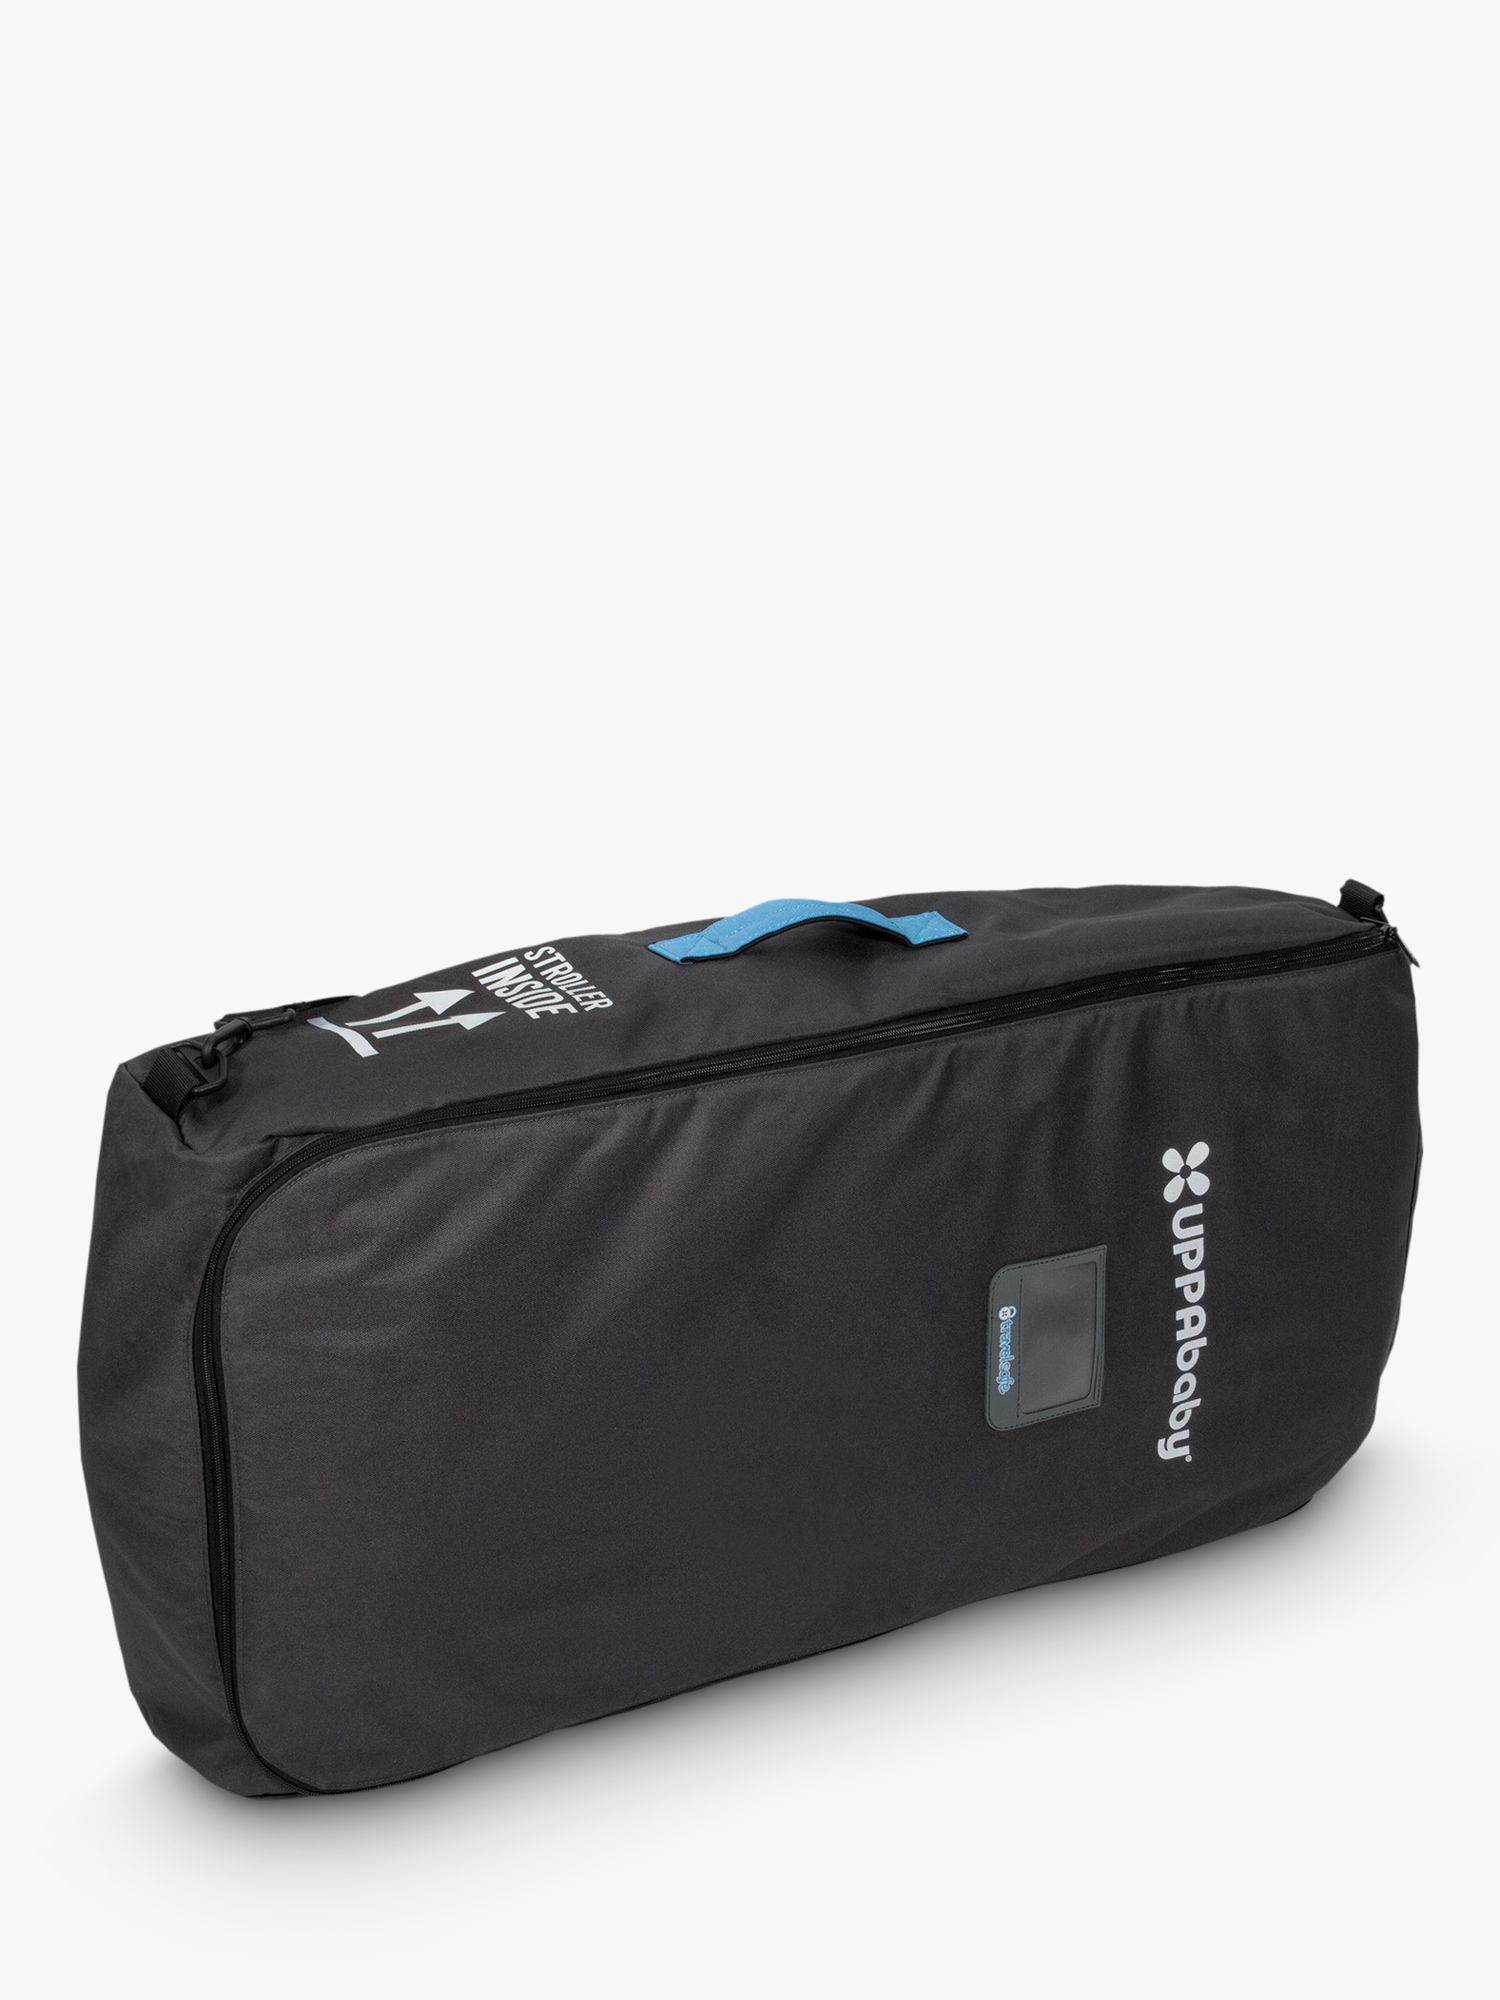 Image of UPPAbaby RumbleCarrycot Travel Bag